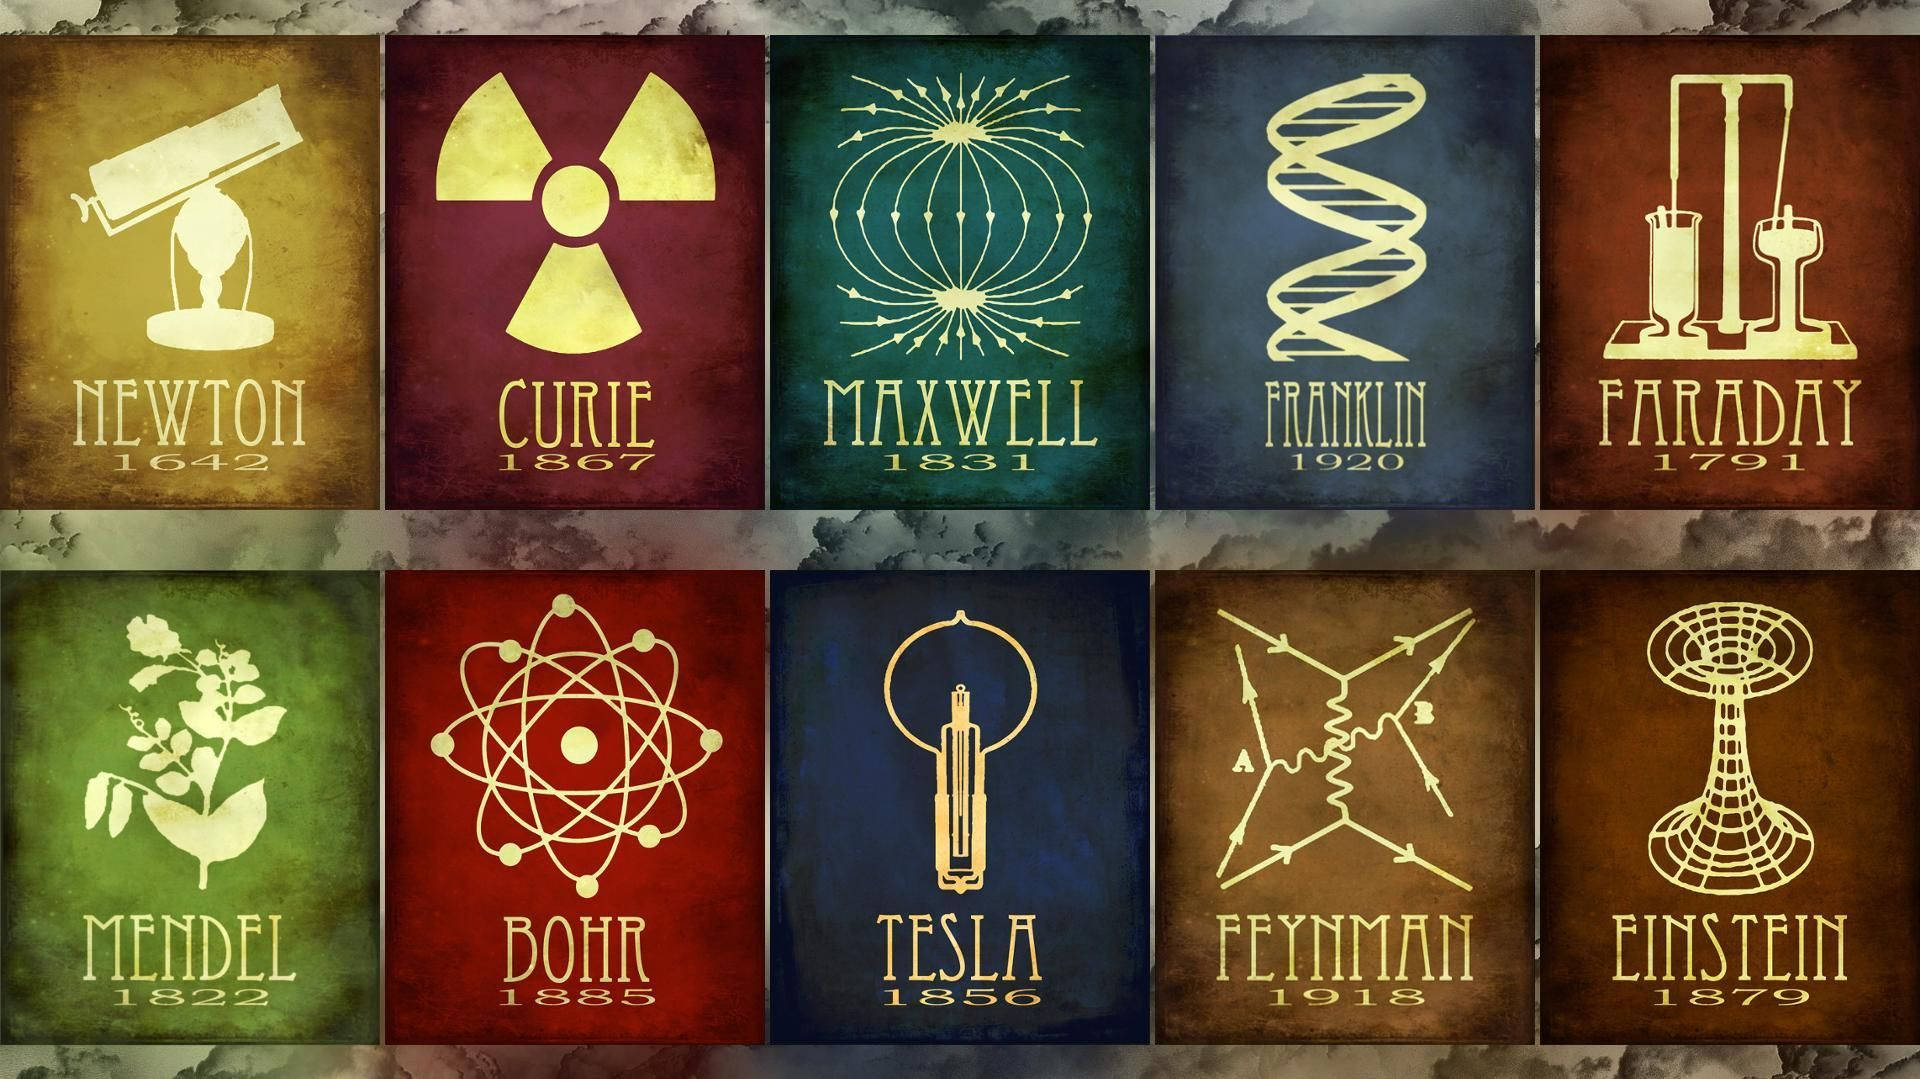 “The Scientists Who Paved the Way” Wallpaper